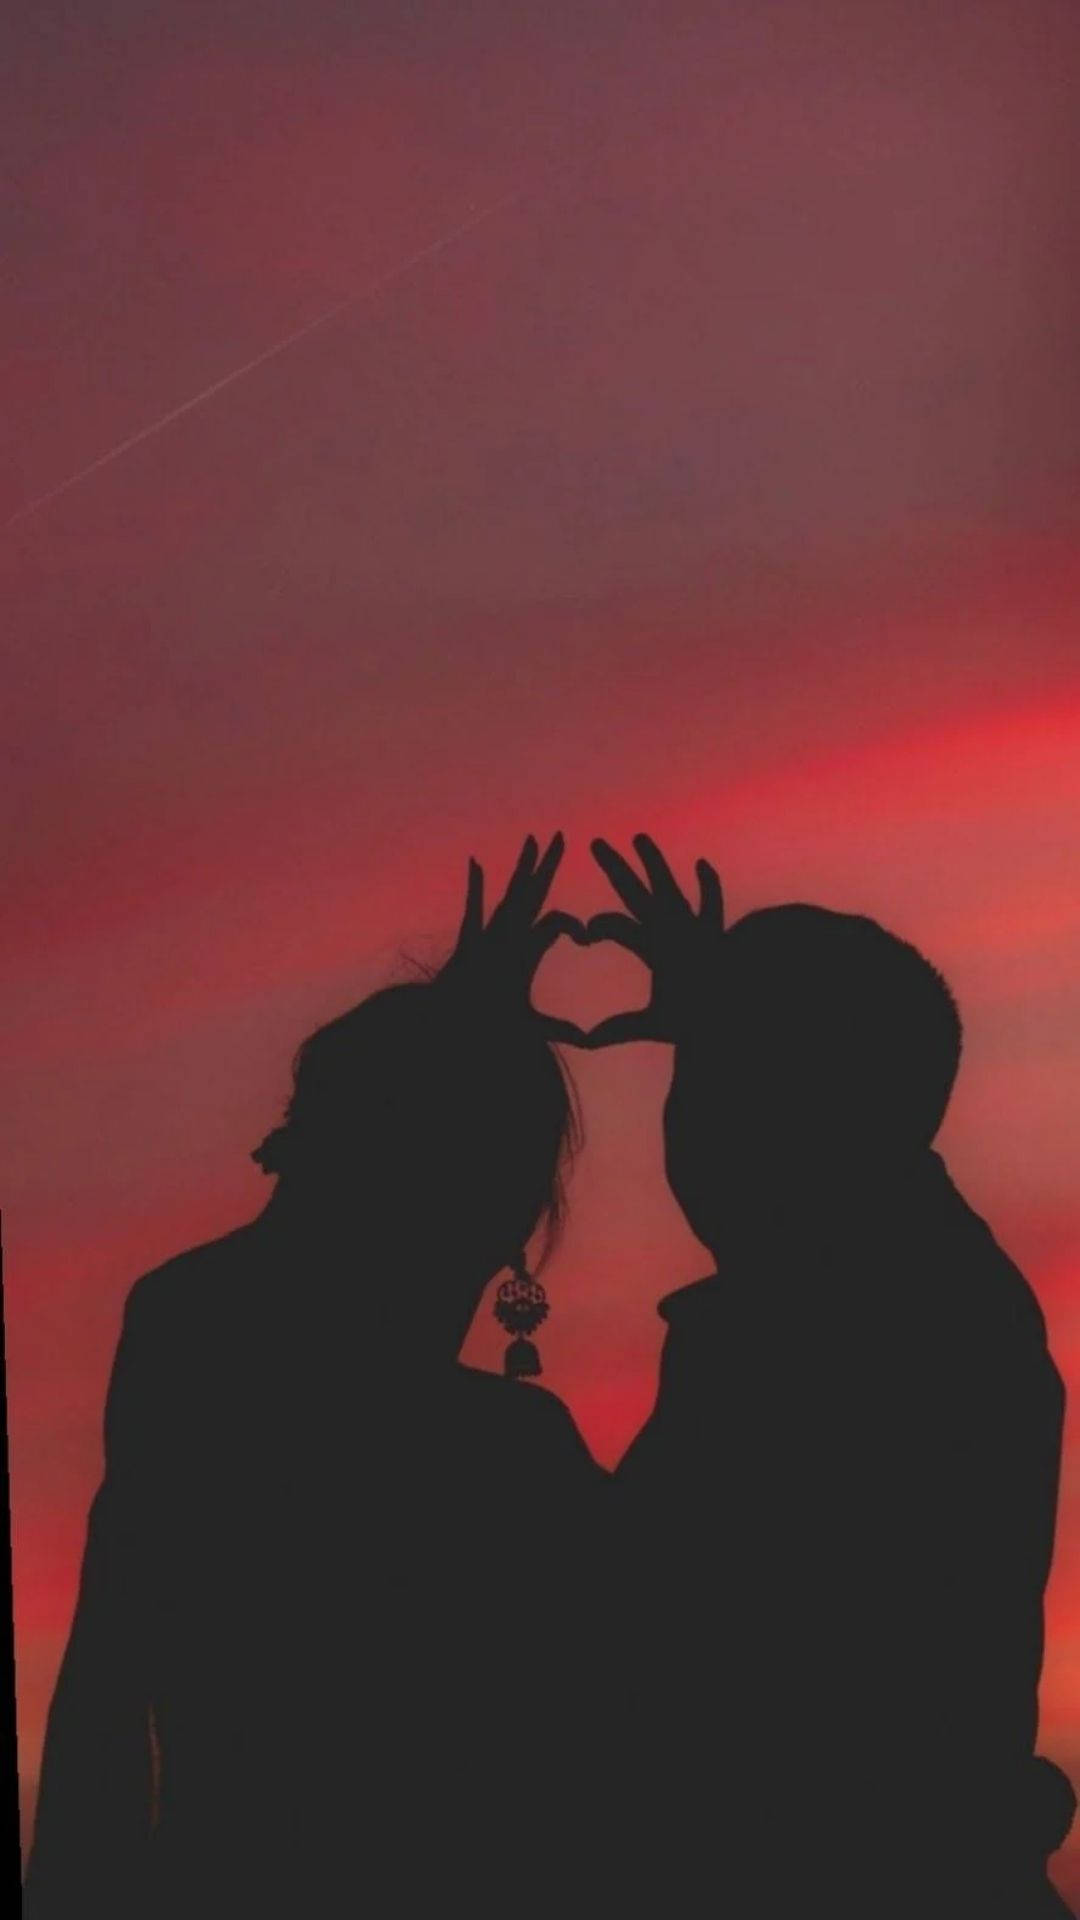 Aesthetic Couple With Red Sky Background